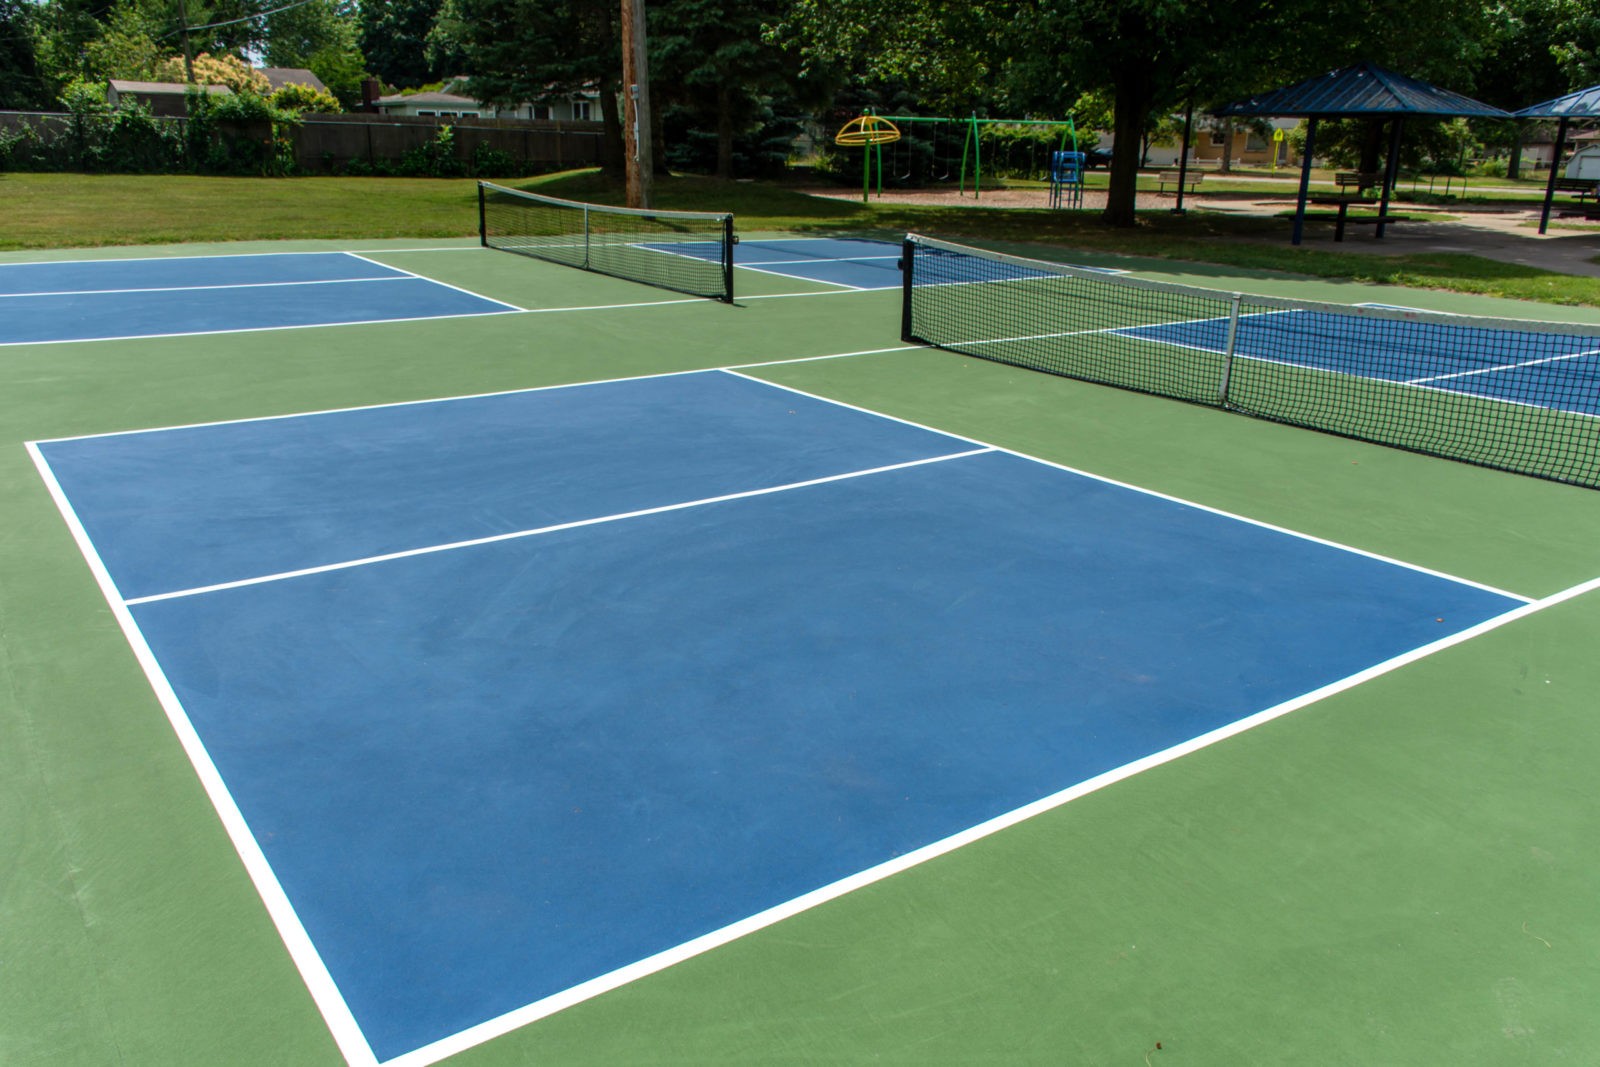 Pickleball Doubles and Singles: What’s the Difference?